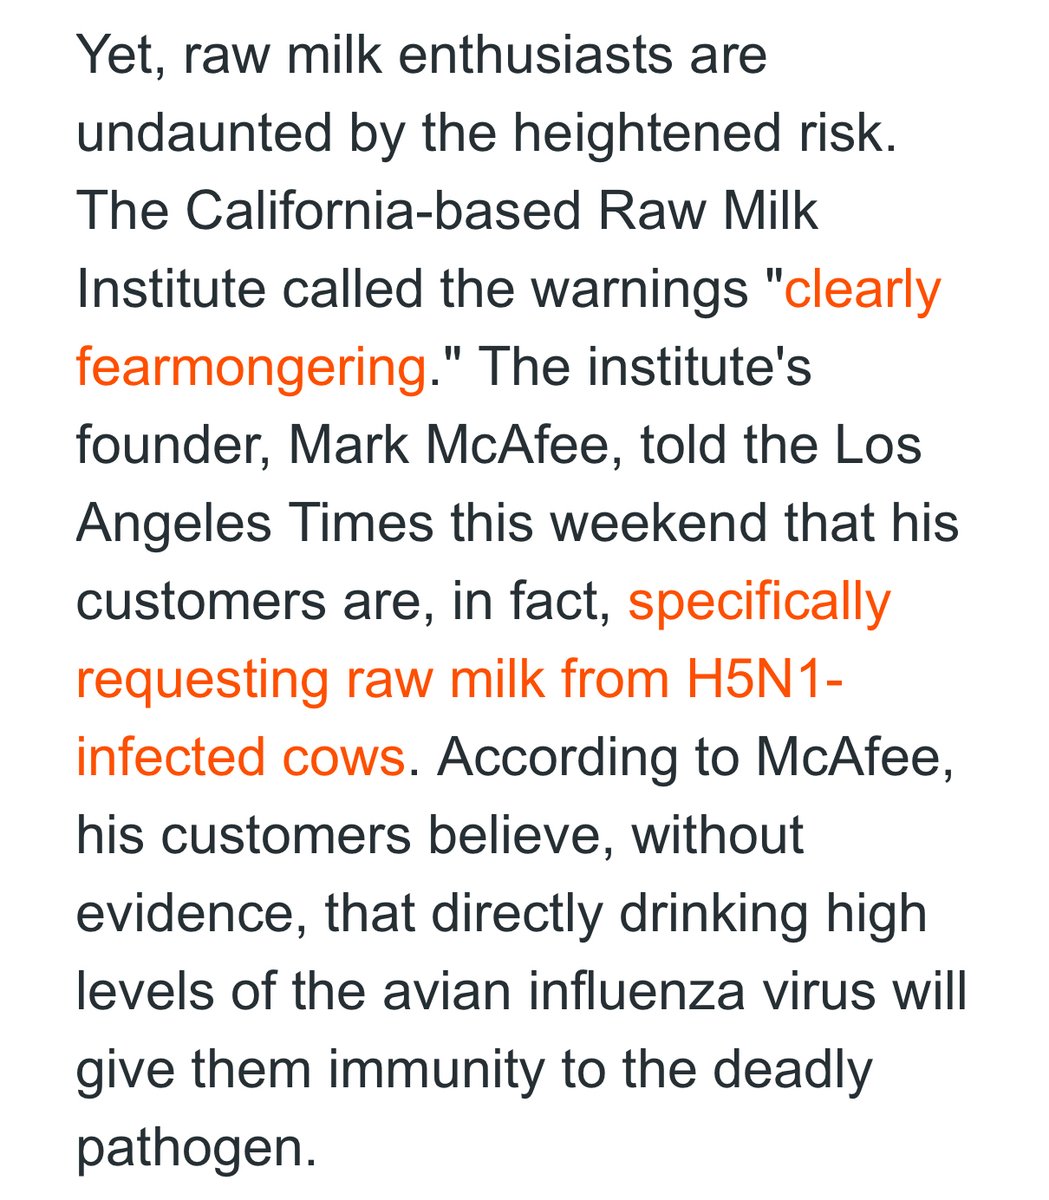 'The Raw Milk Institute called the warnings 'clearly fearmongering.' The institute's founder told the LATimes his customers are specifically requesting raw milk from H5N1-infected cows.' This is an example of how minimizing COVID is destructive to public health far beyond COVID.